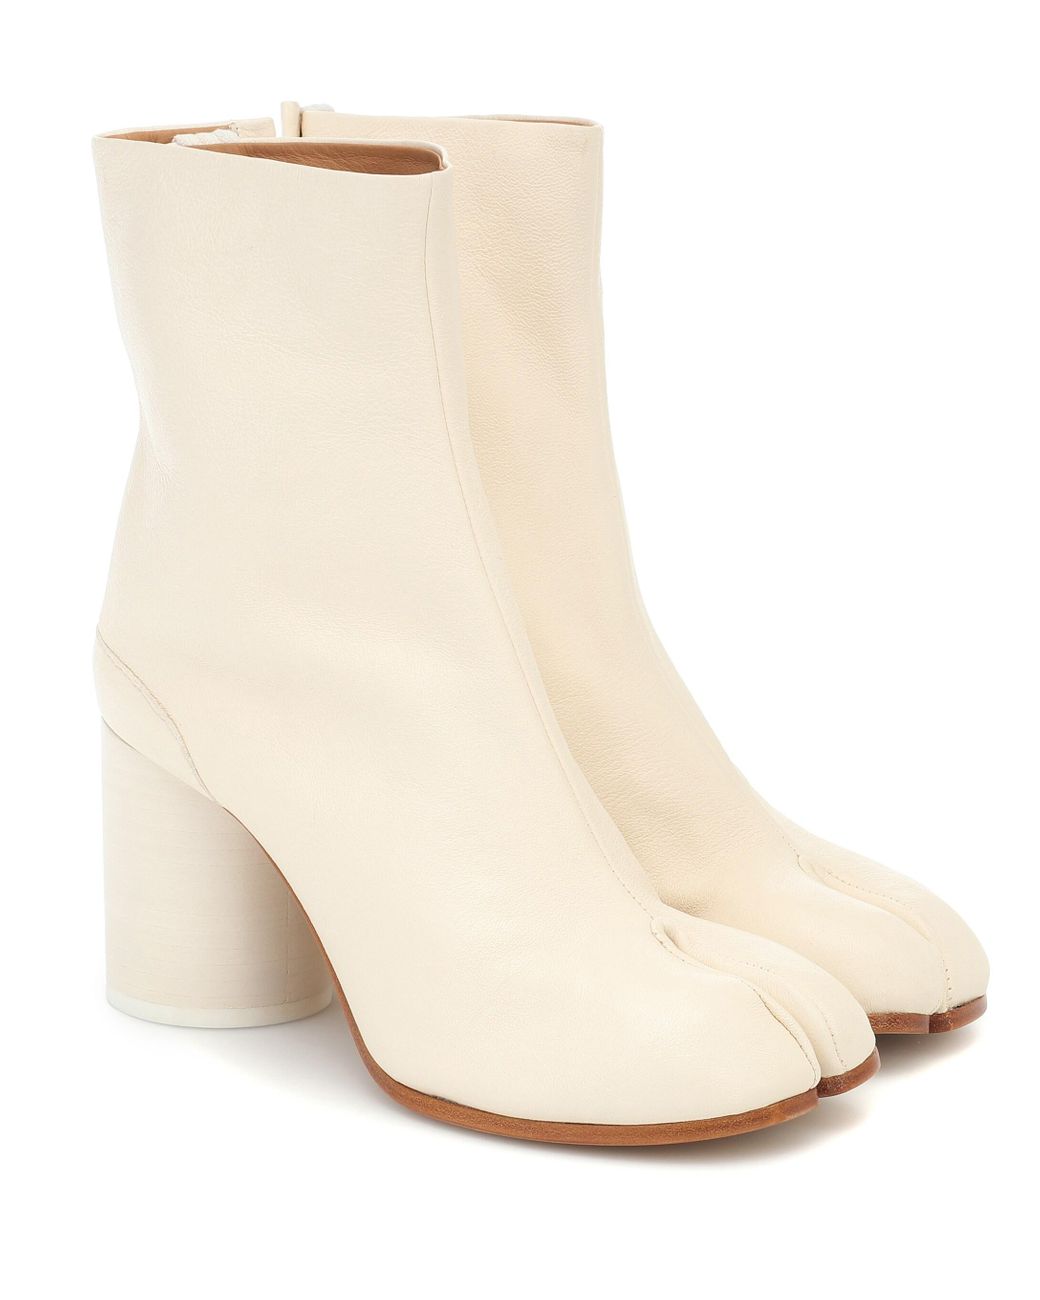 Maison Margiela Tabi Leather Ankle Boots in White - Lyst